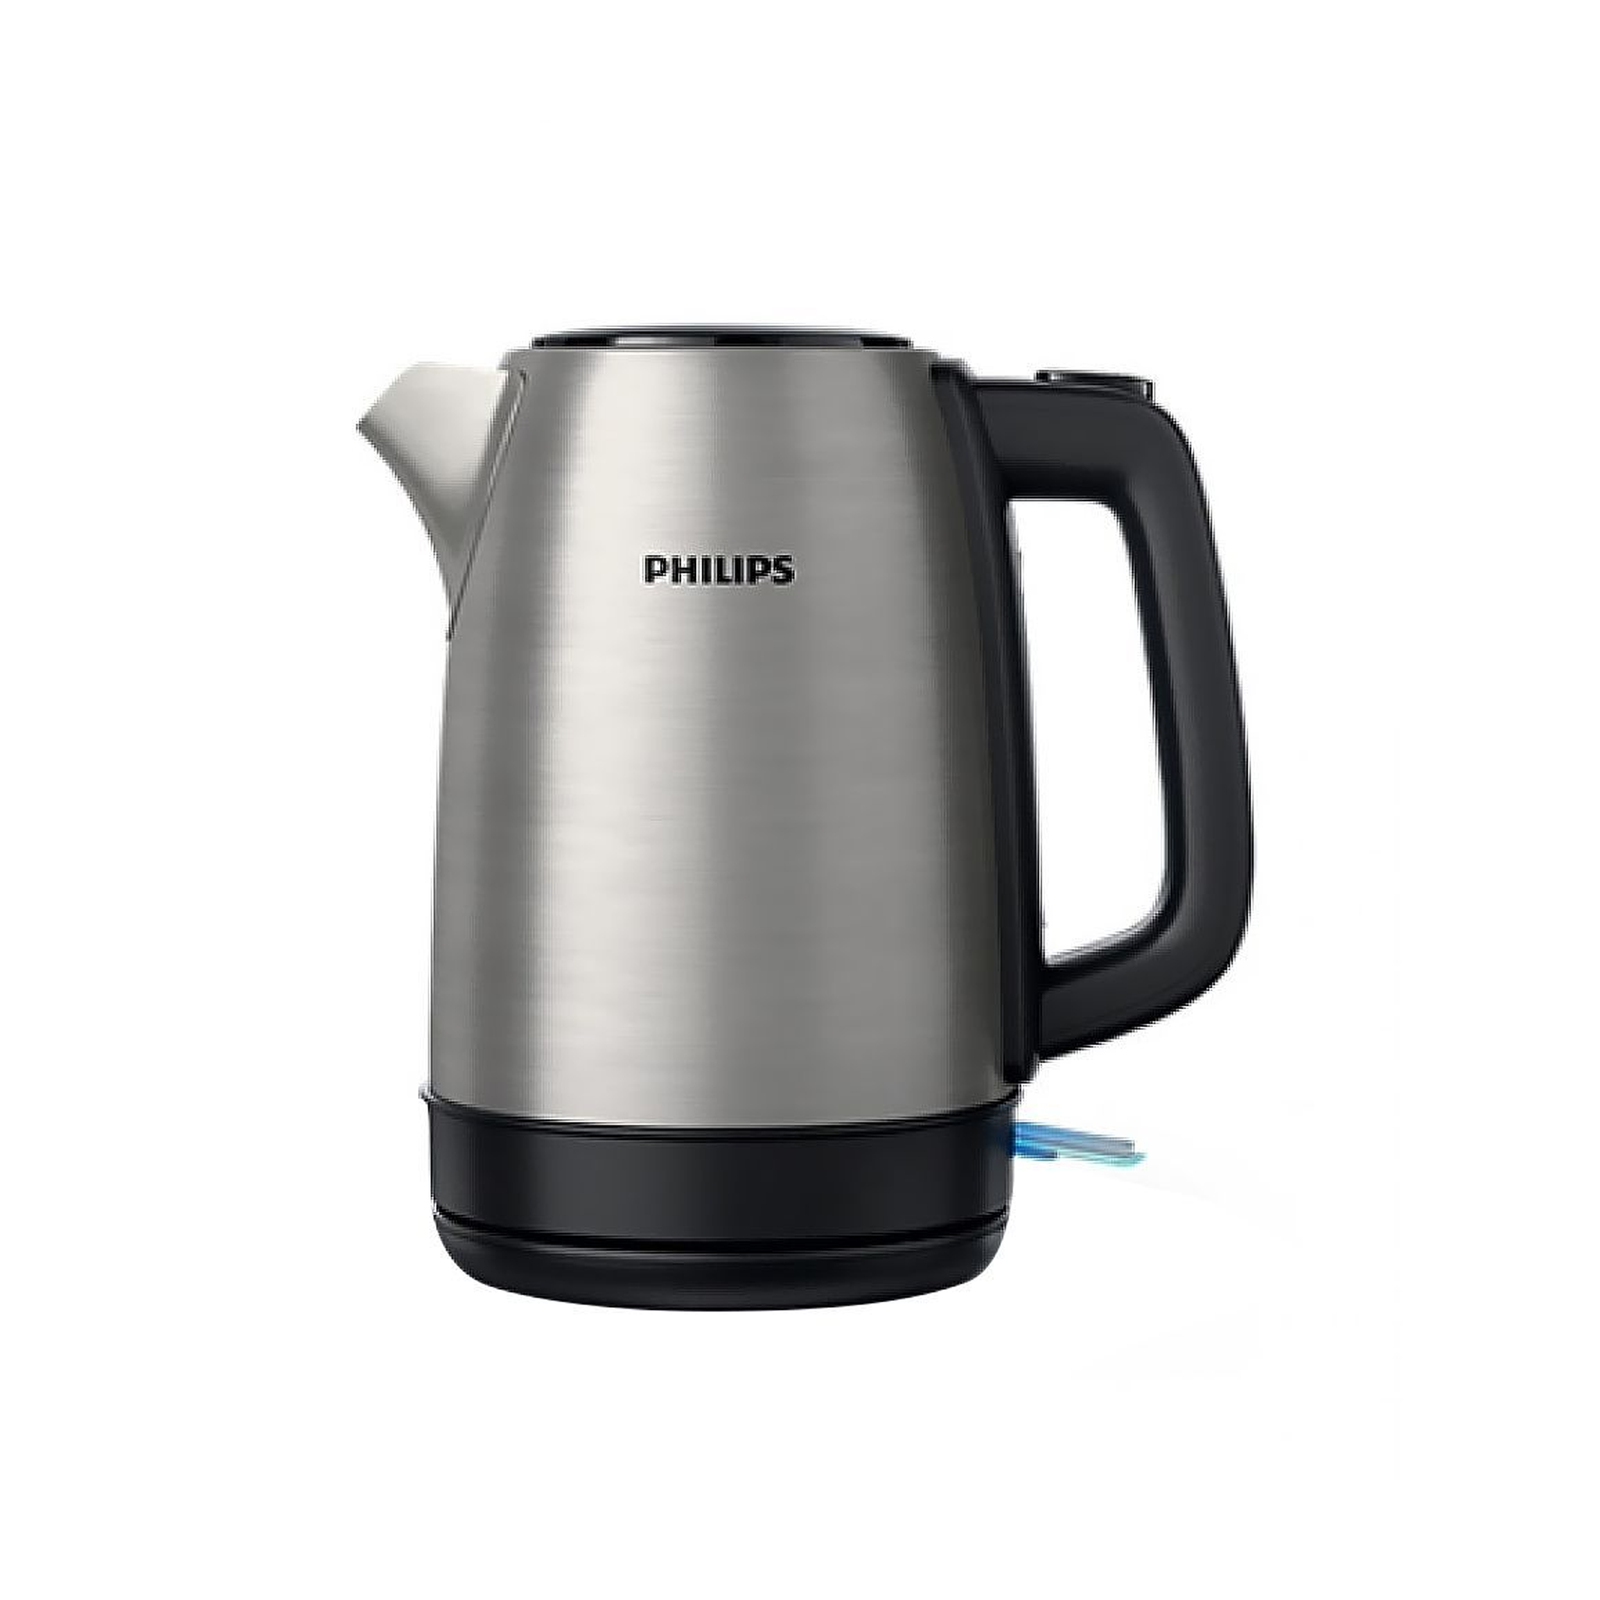 PHILIPS Fast Heating Electric Kettle 2.3L